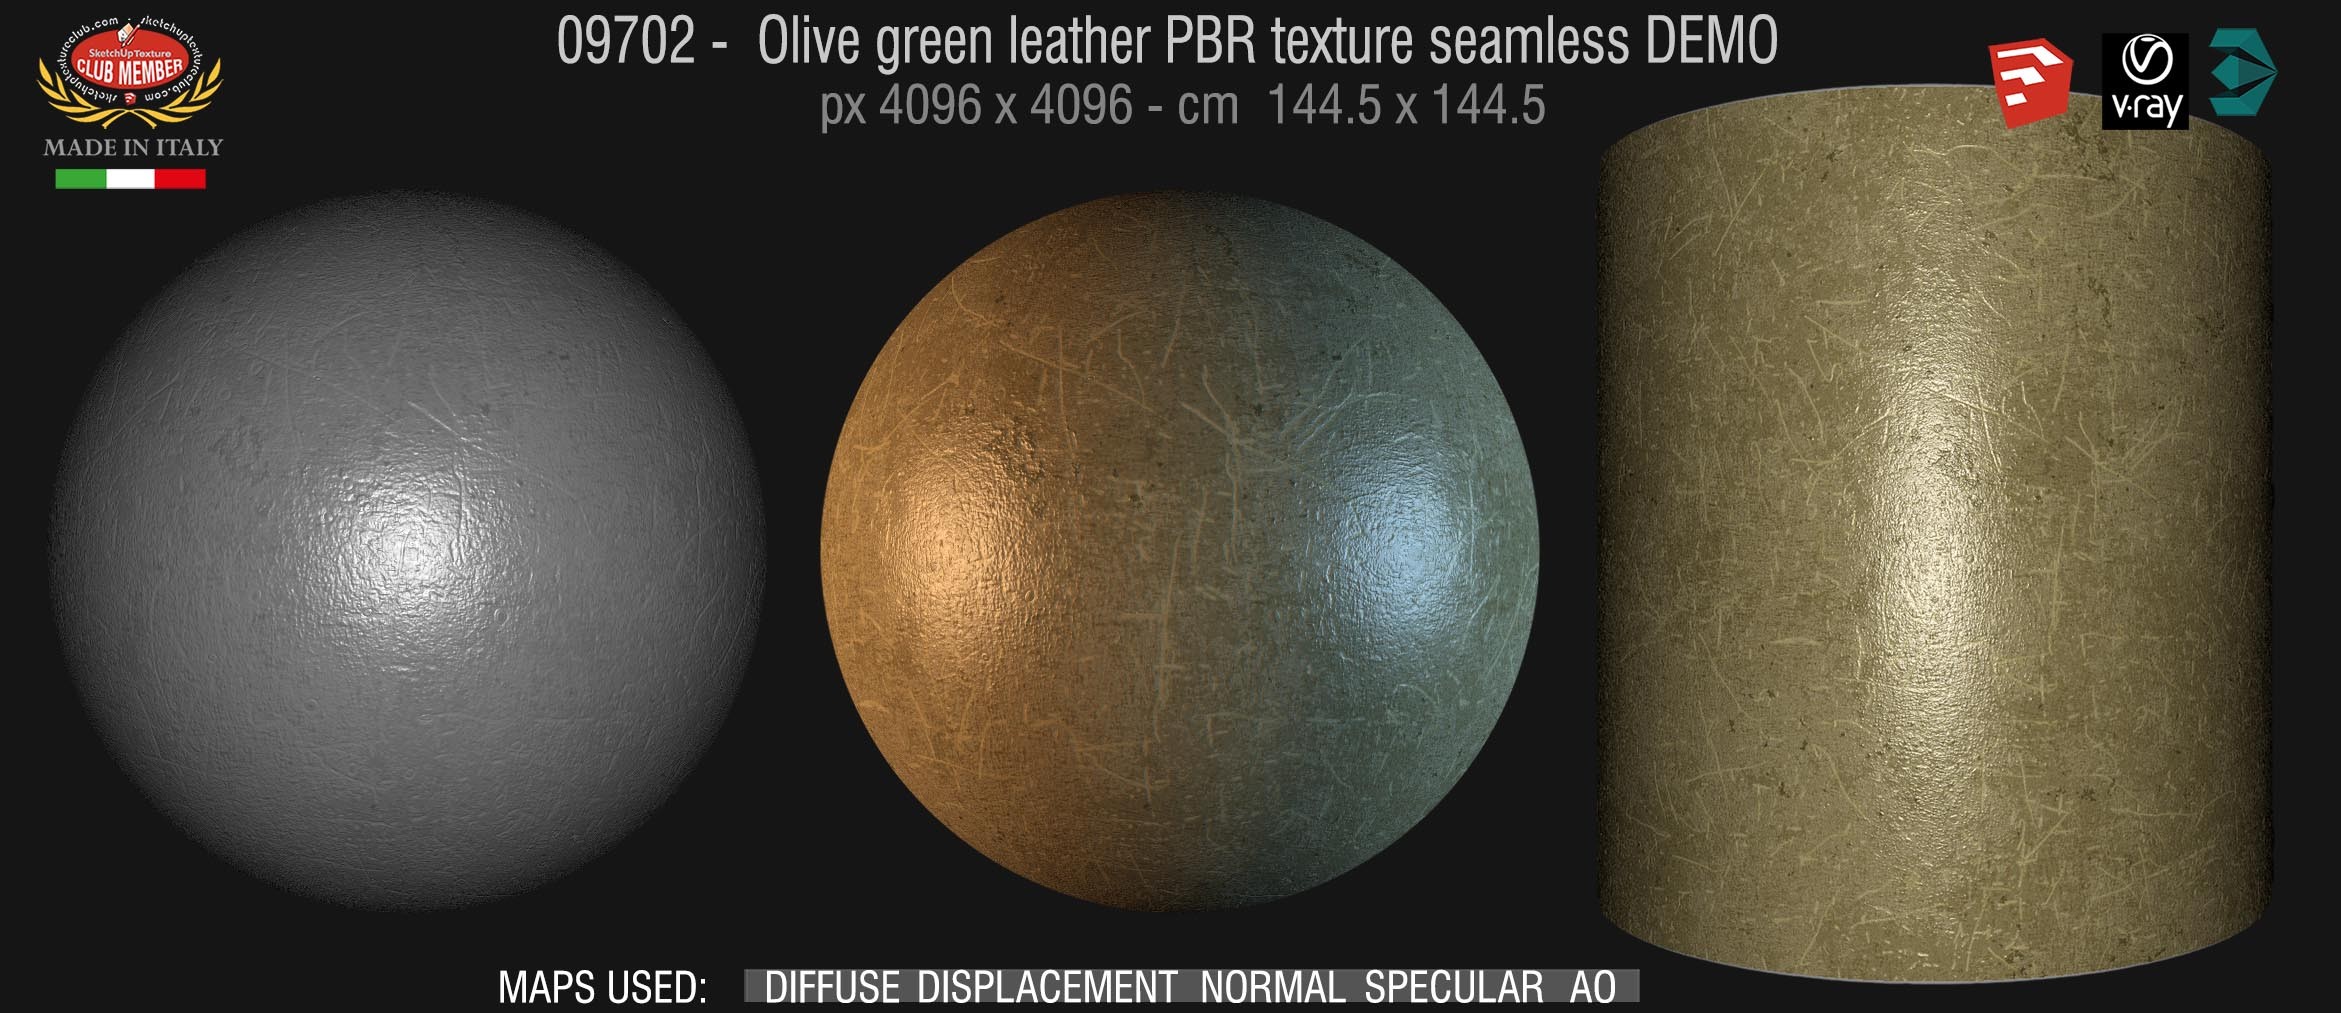 09702 Olive green leather PBR texture seamless DEMO